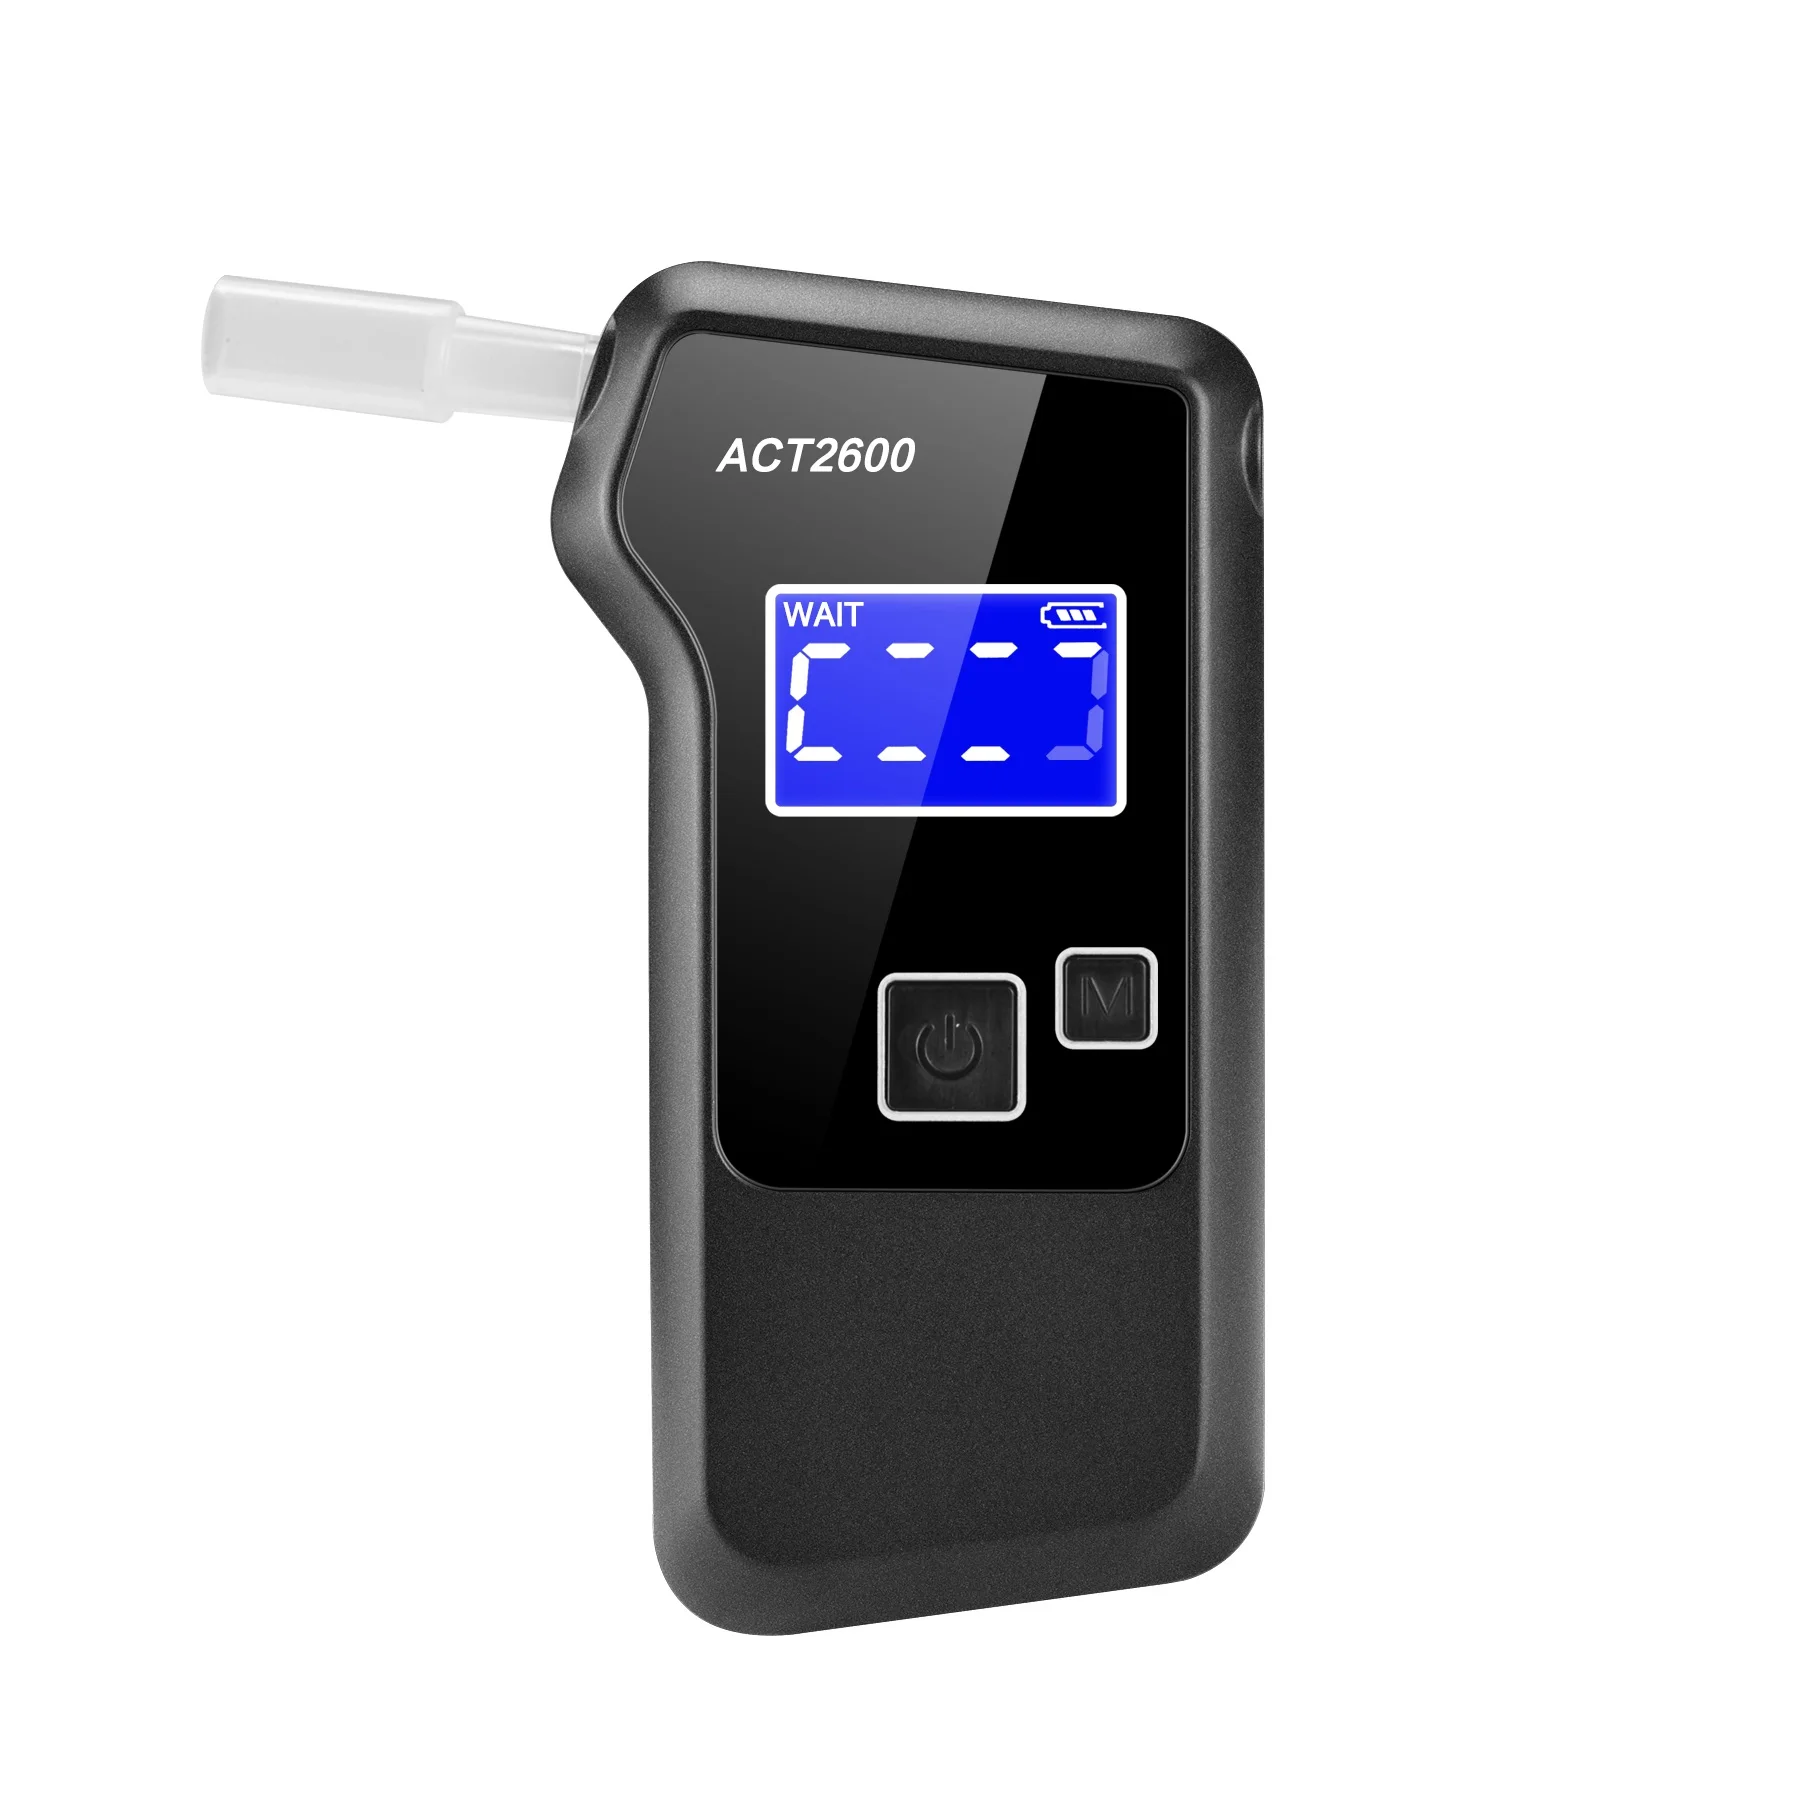 Portable LCD digital display breath fuel cell alcohol tester alchol tester